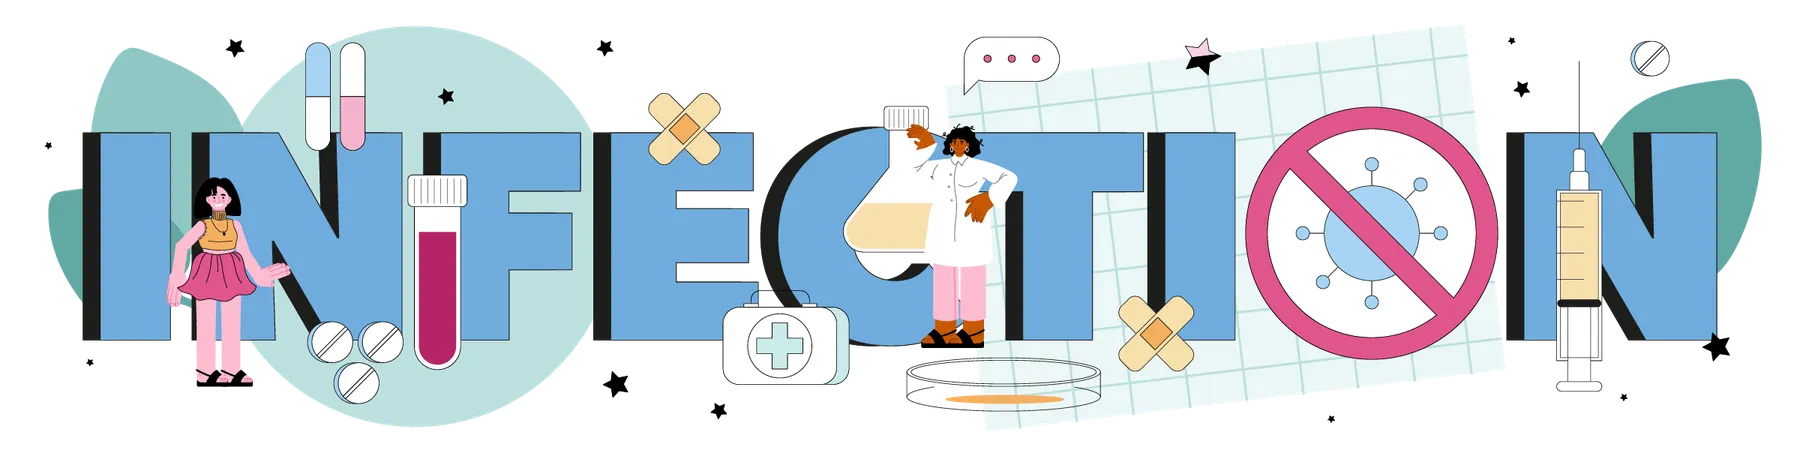 Infection Typographic Header Infection Disease Specialist Treating Infectious Disease Virus And Respiratory Infection Outbreak Emergency Help Flat Vector Illustration Illustration